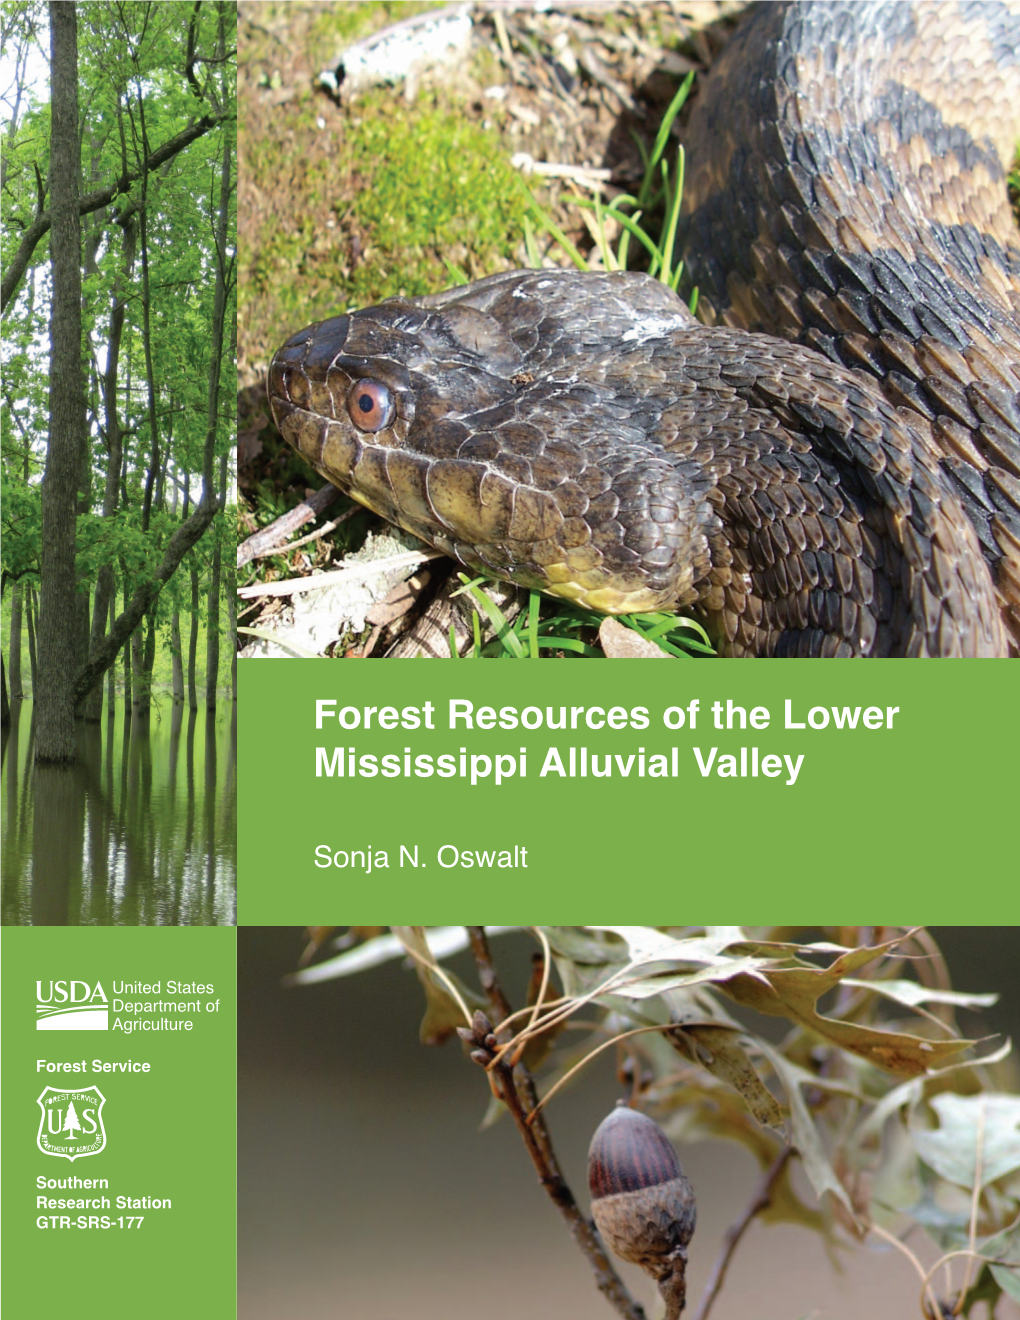 Forest Resources of the Lower Mississippi Alluvial Valley